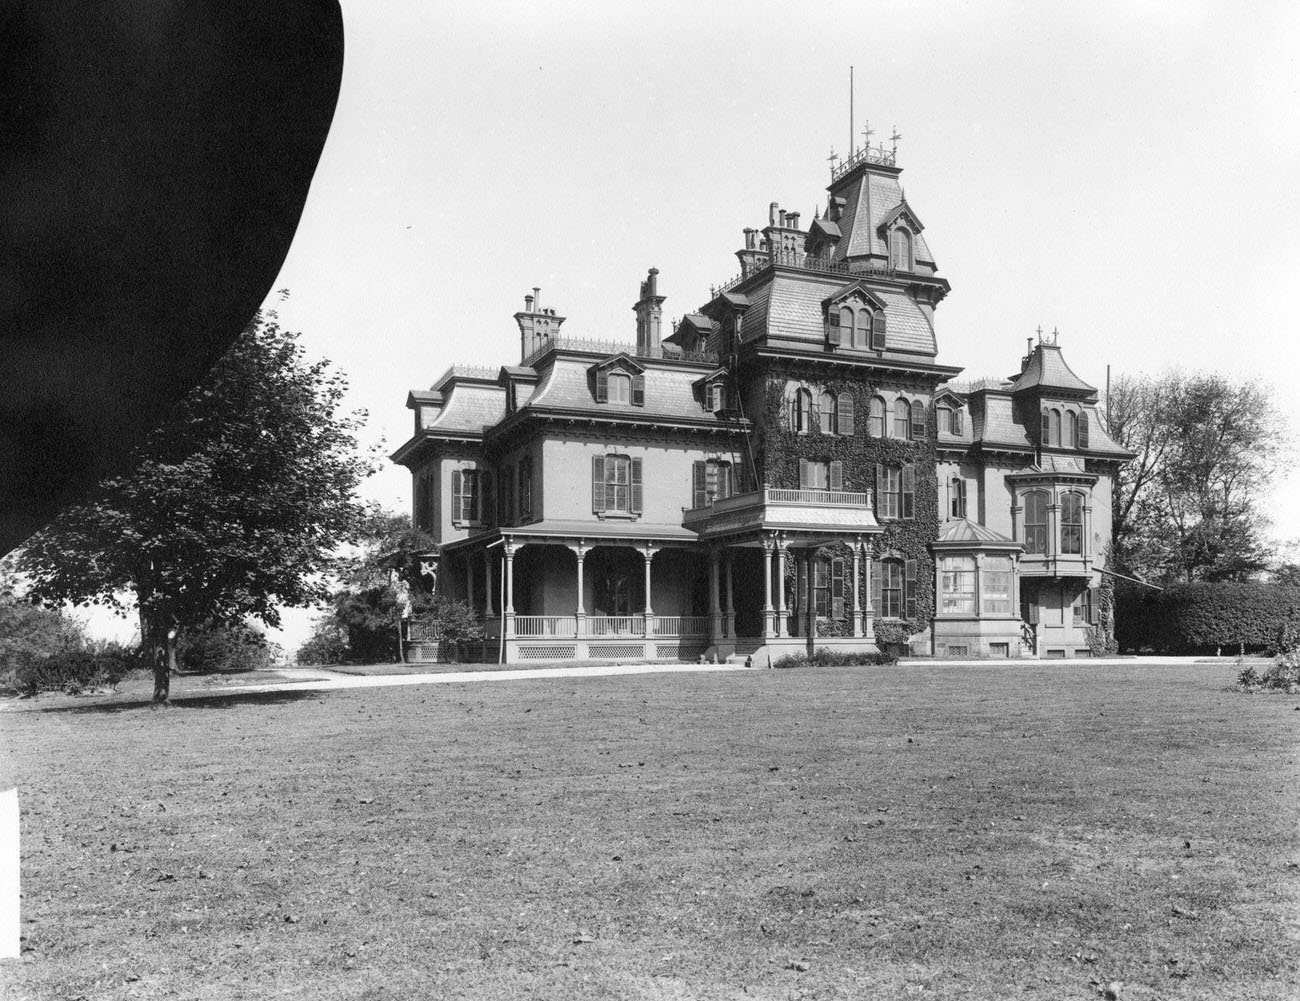 Anson Phelps Stokes House, Between Hamilton Avenue And St Mark'S Place Near Phelps Place, Staten Island, New York, 1895.